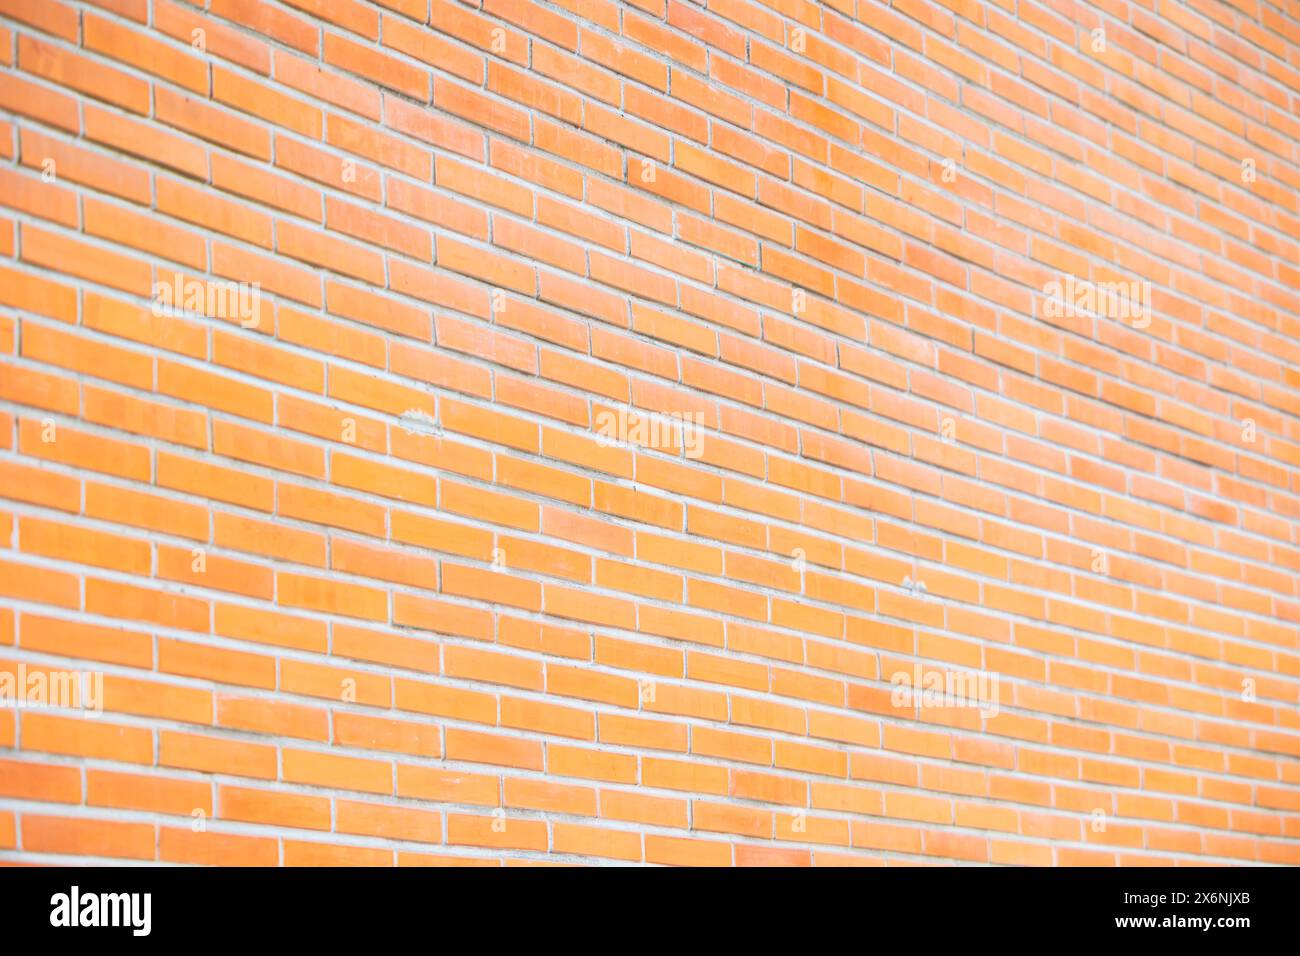 brick wall modern building wall texture pattern construction building background Stock Photo